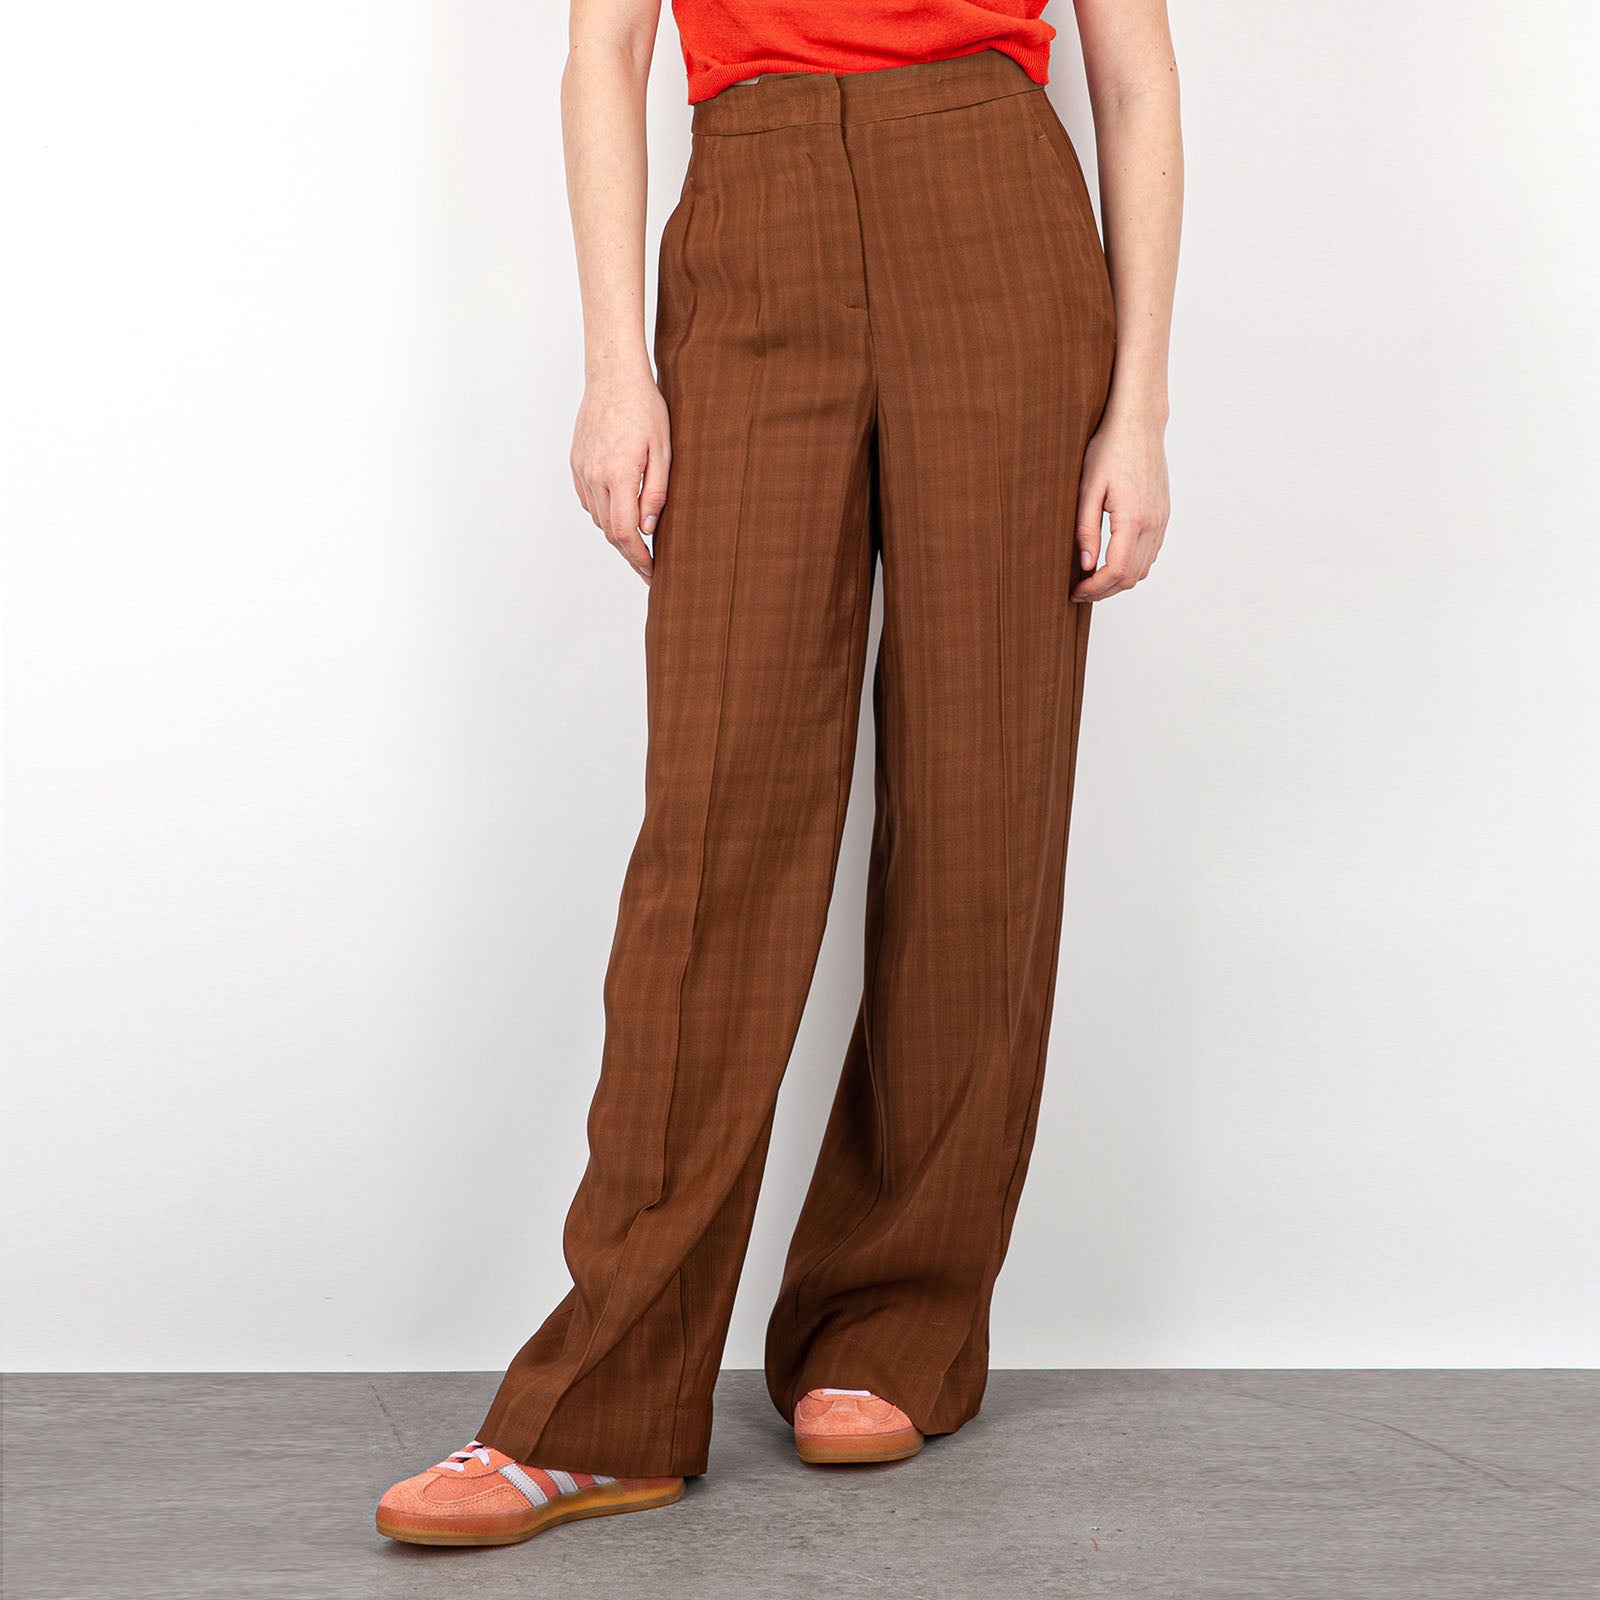 SemiCouture Marlee Synthetic Trousers Tobacco - 8